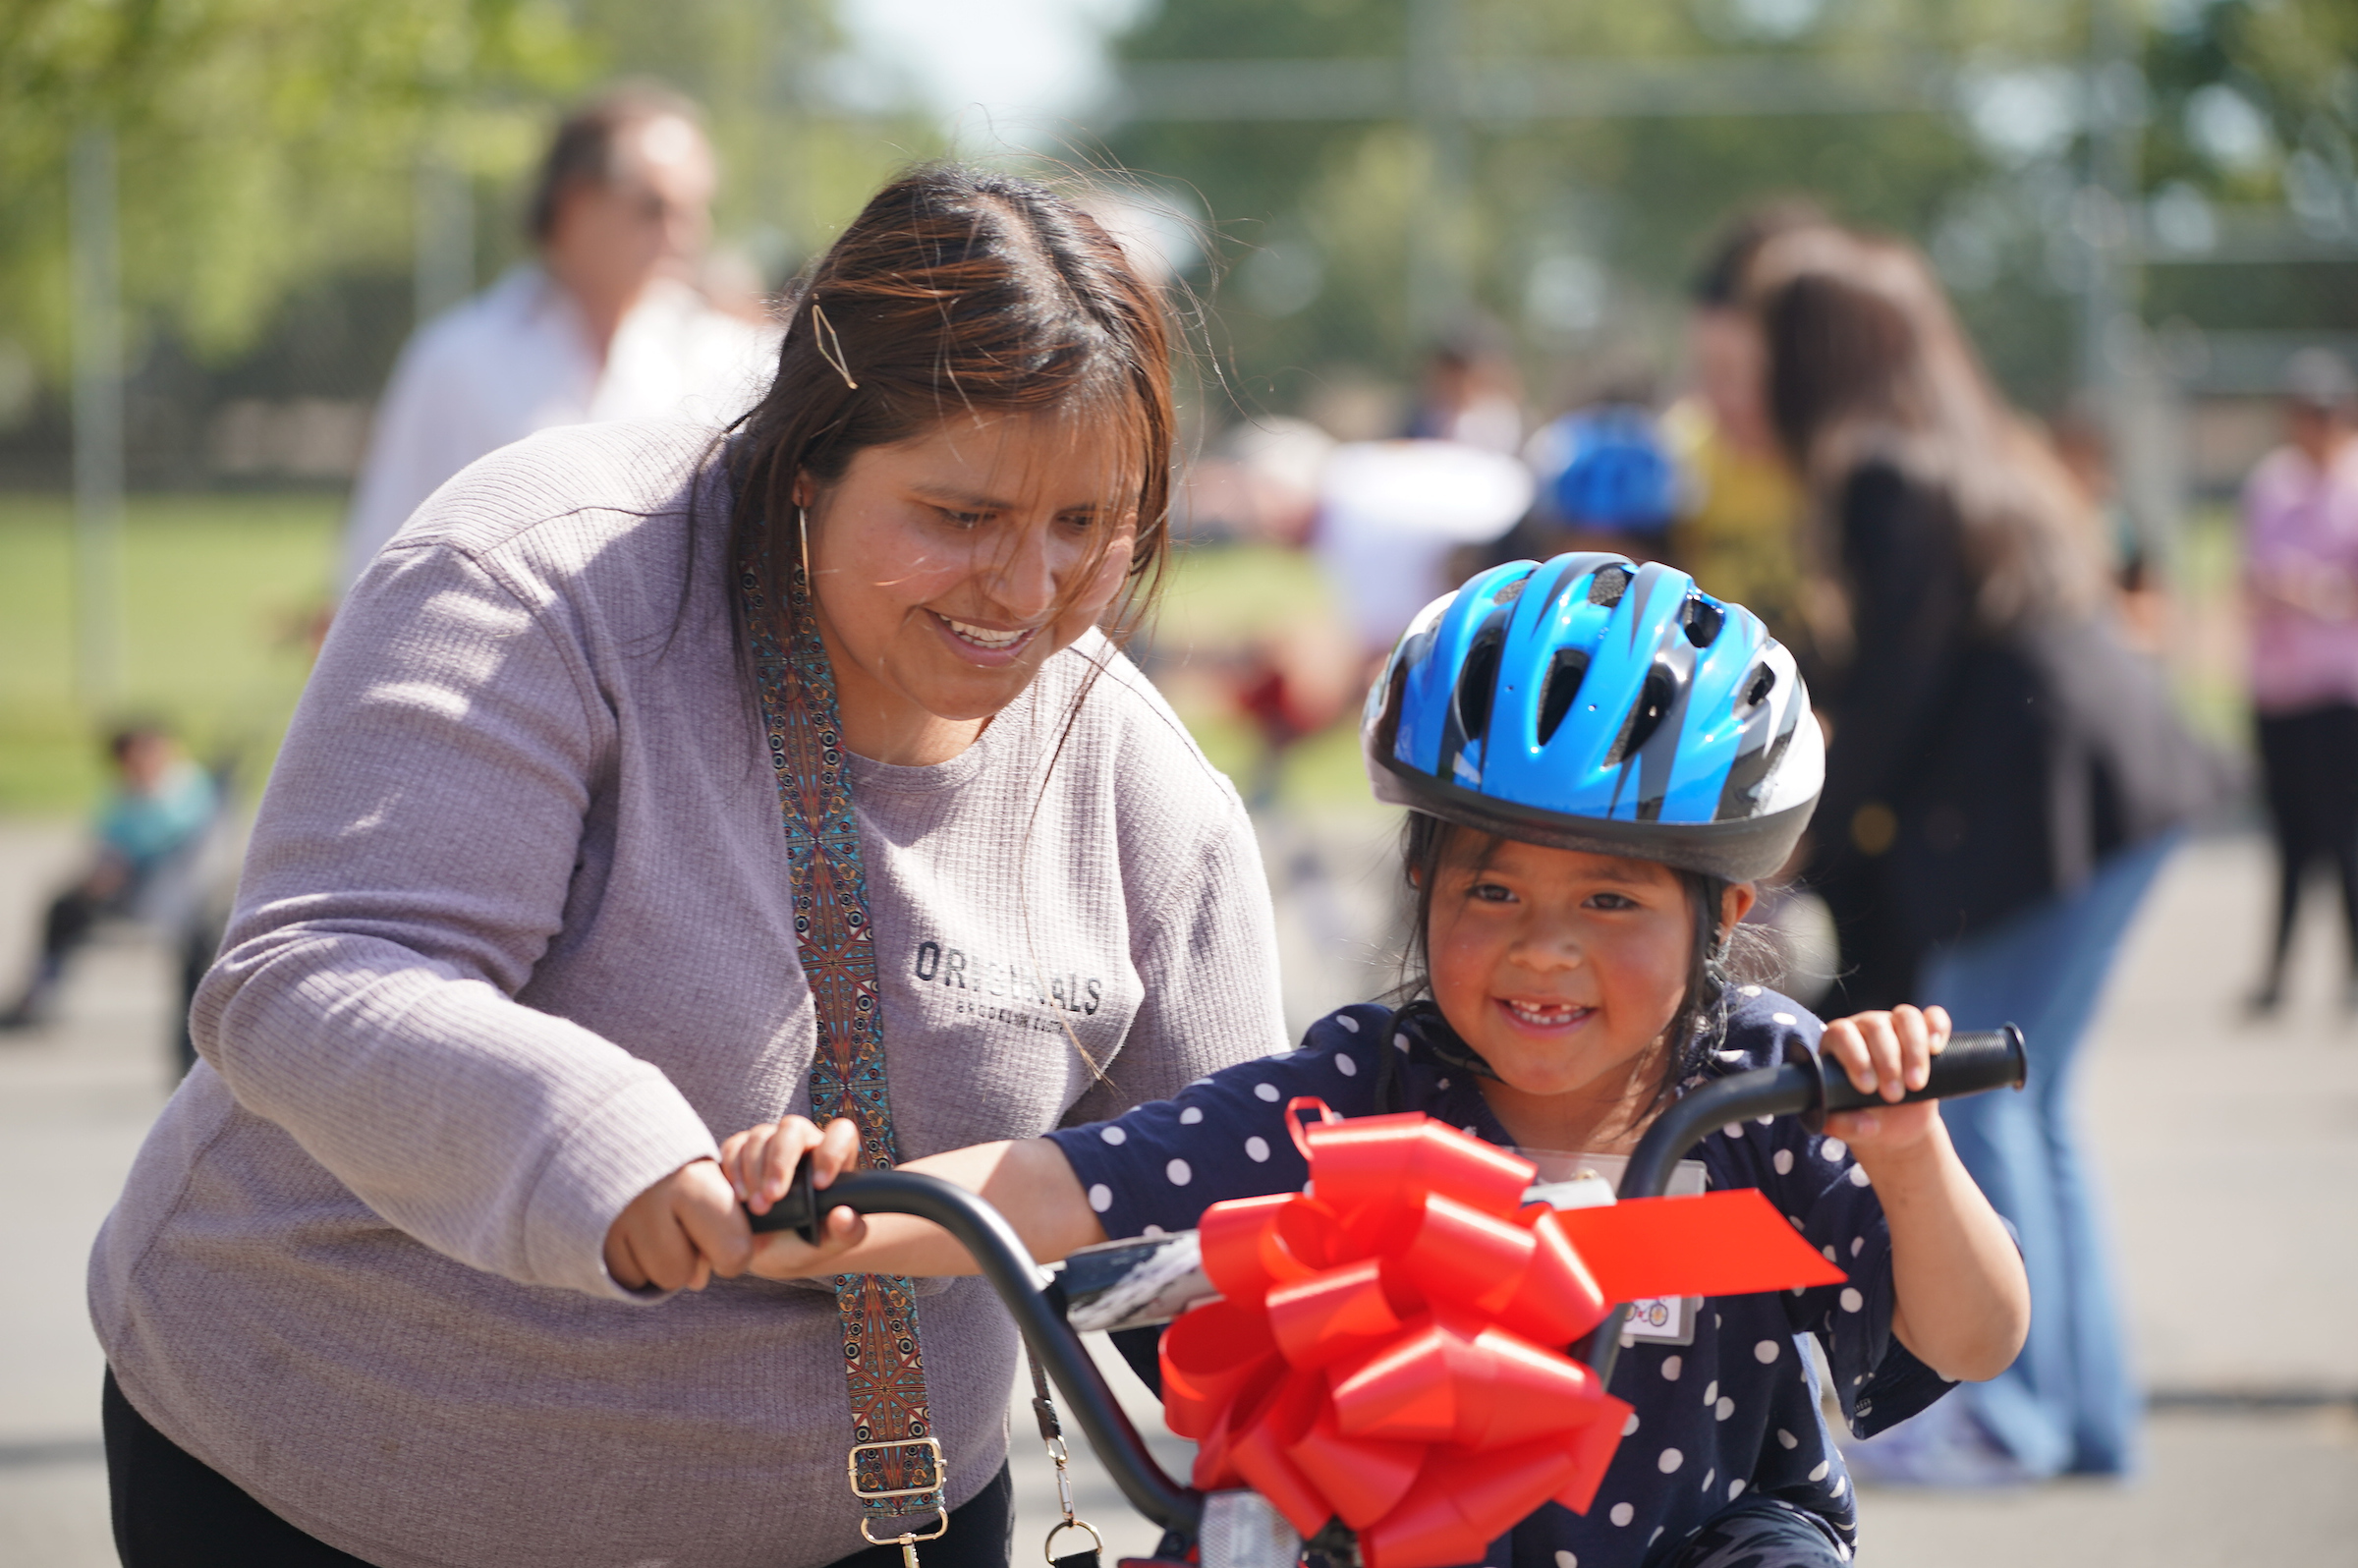 Comcast Surprises Kids & Youth with Bikes Just in Time for the Summer